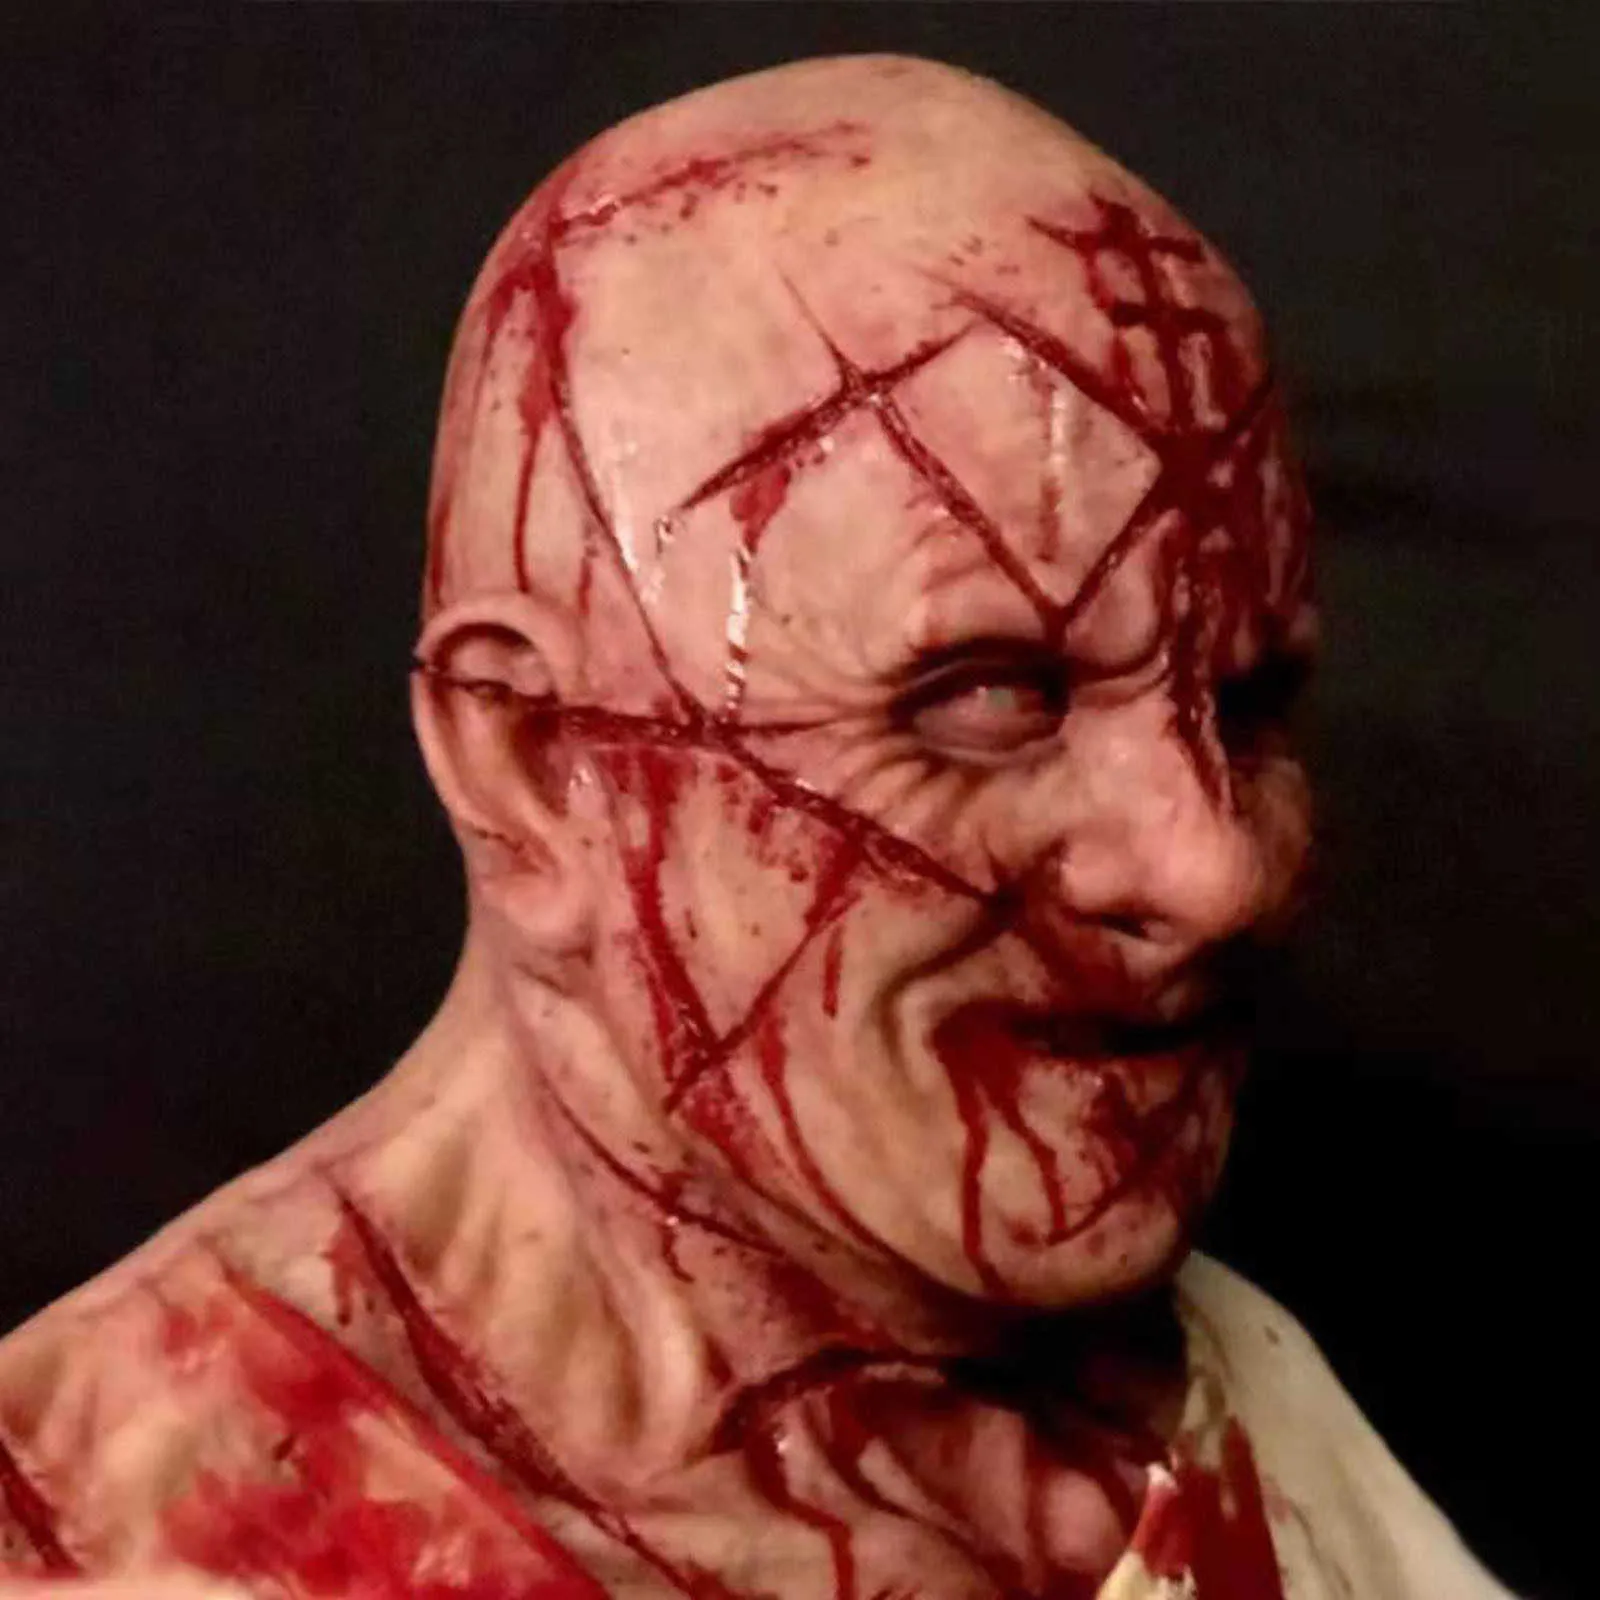 Scary Bald Blood Scar Mask Horror Bloody Headgear 3d Realistic Human Face Headgear emulsion latex adults Mask breathable masque Q0238r